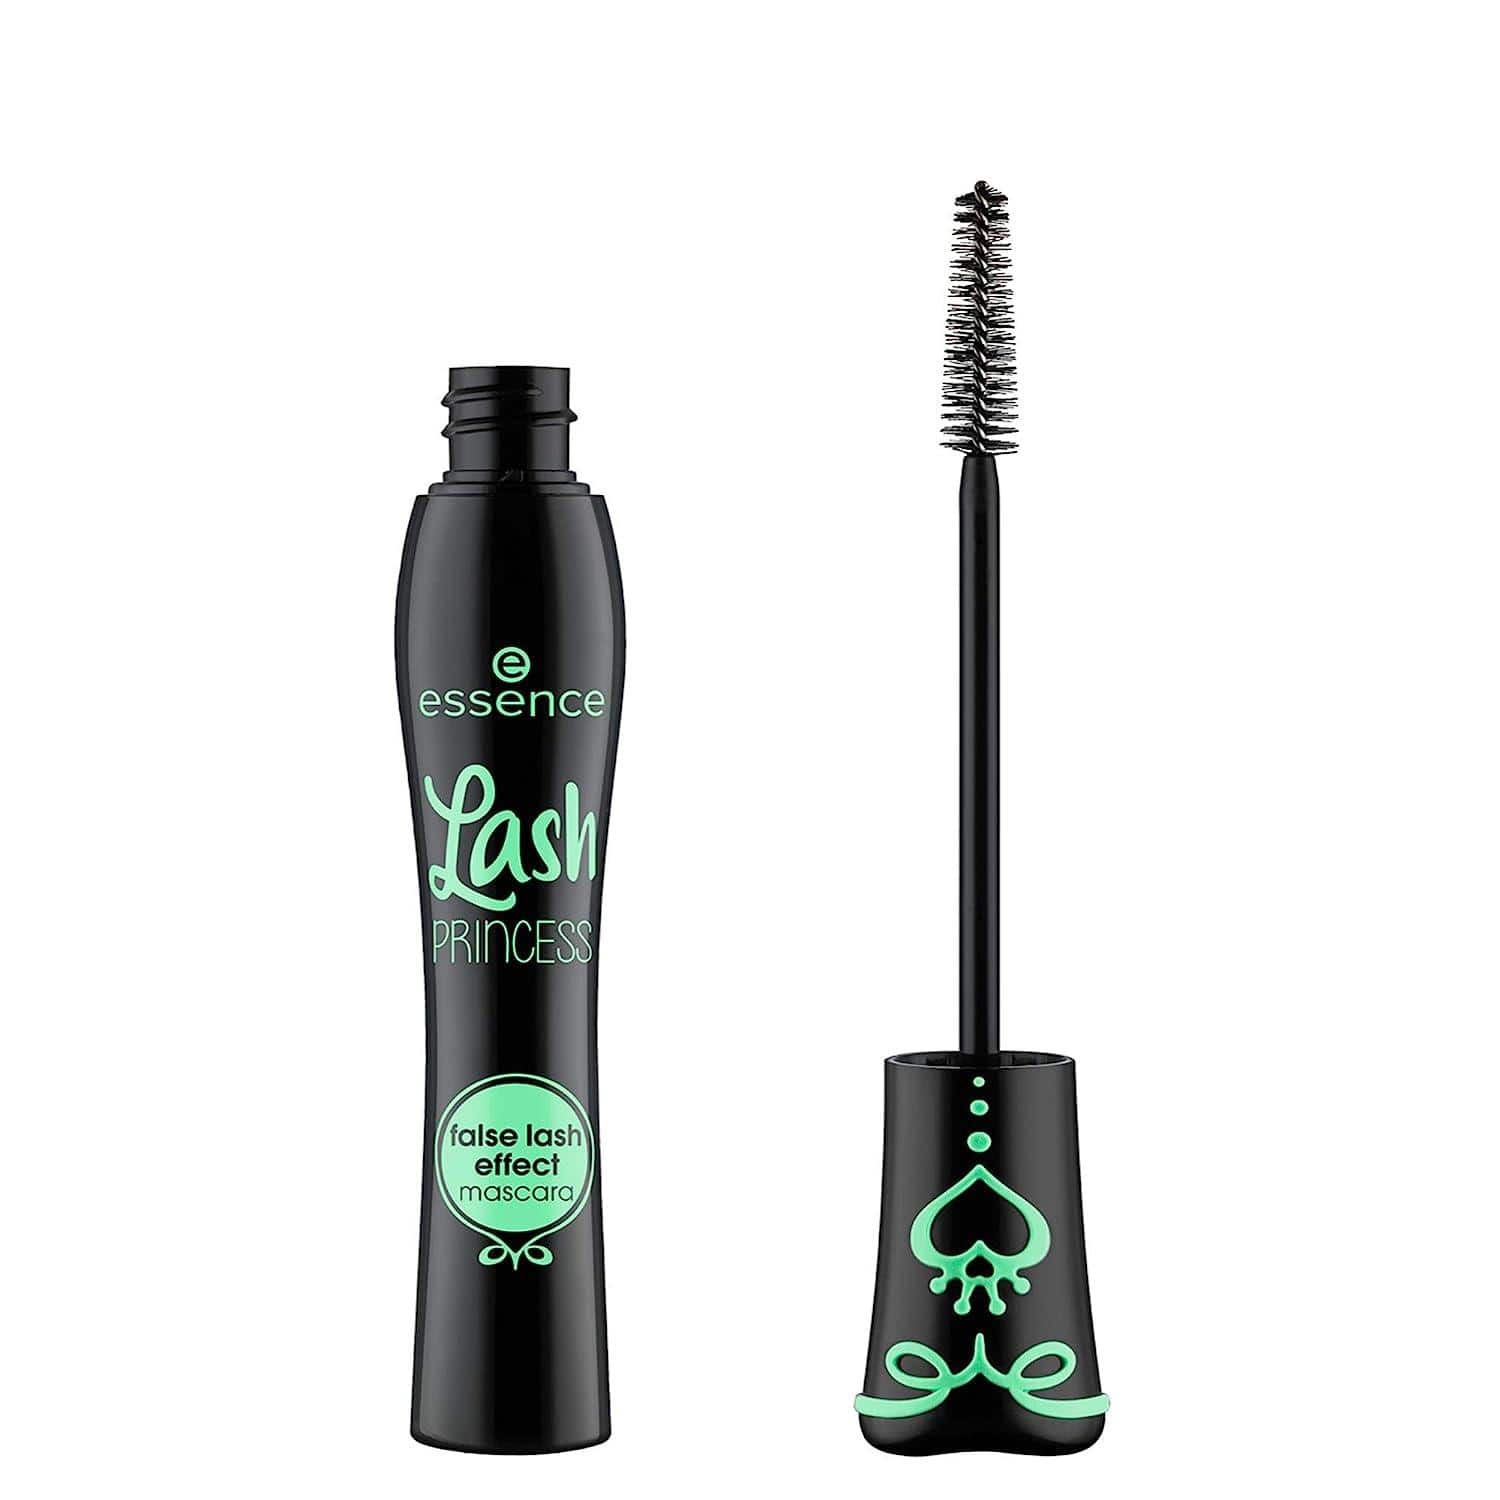 this affordable choice, beloved by beauty gurus, stays put, resists smudging, and effortlessly lifts lashes with a lightweight sculpting wand, making it a standout in my beauty routine.